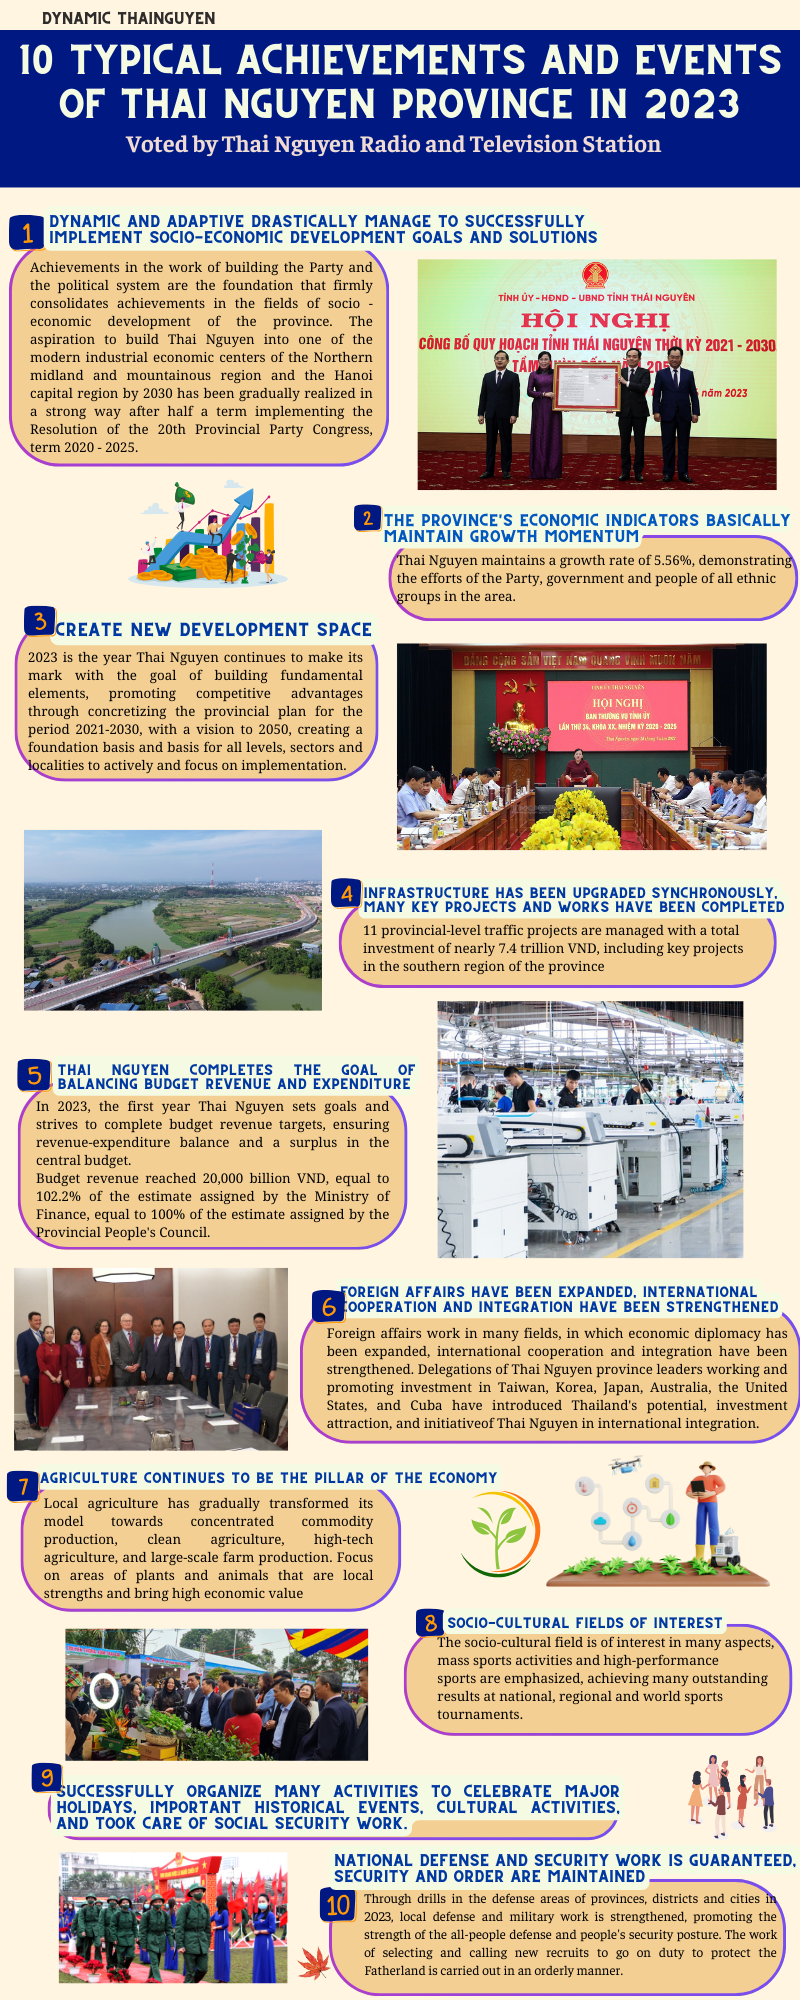 [ INFOGRAPHIC ] 10 TYPICAL ACHIEVEMENTS AND EVENTS OF THAI NGUYEN PROVINCE IN 2023